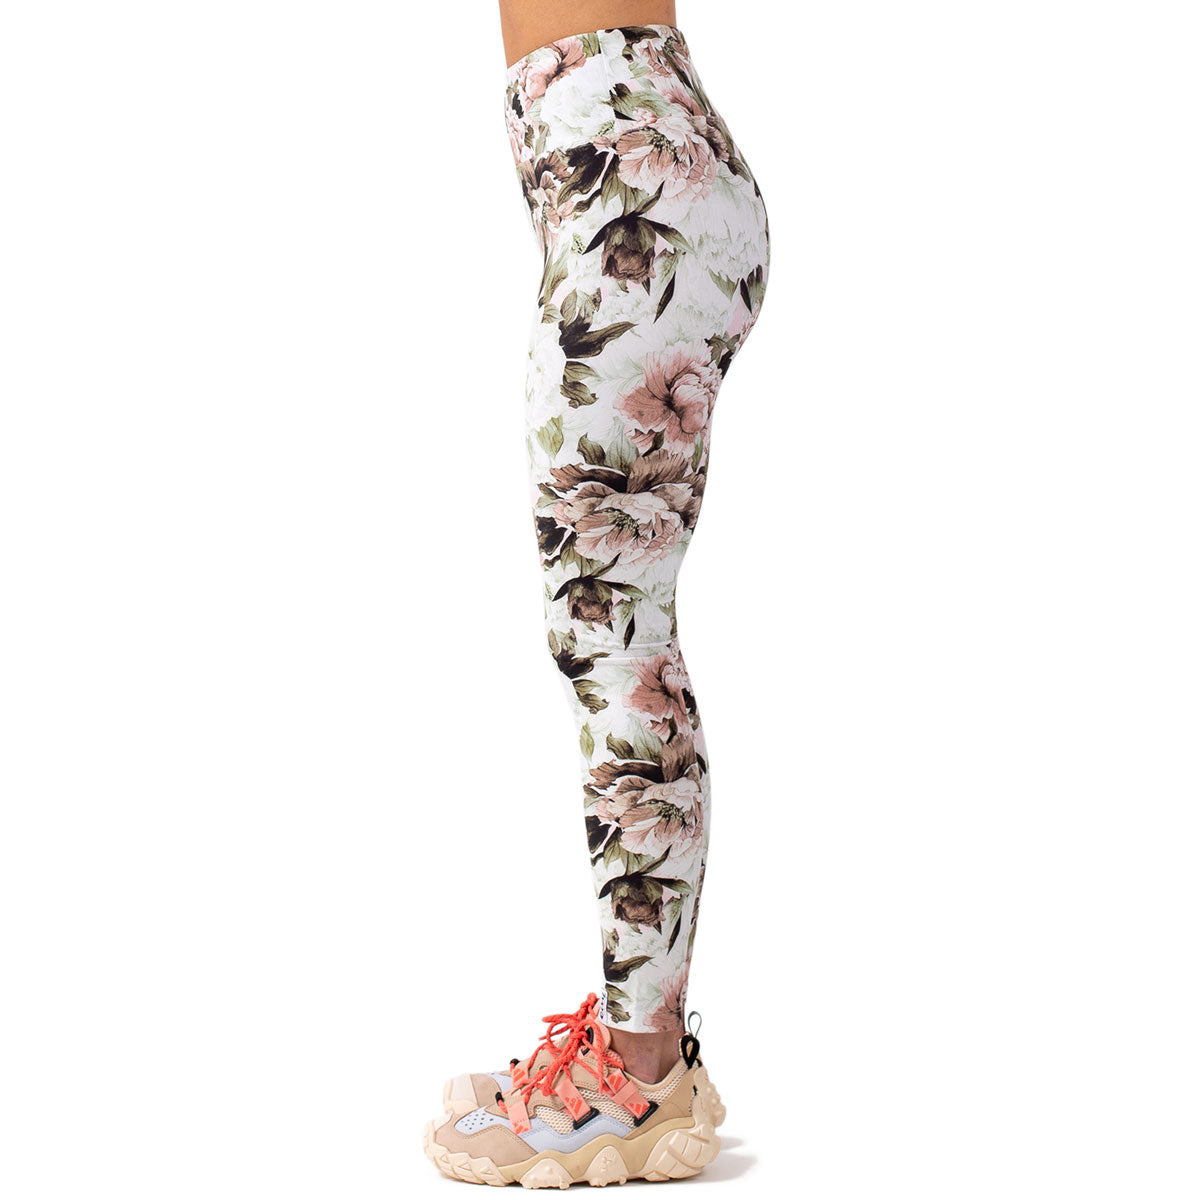 Eivy Icecold Tights Snowboard Base Layer - Bloom image 3